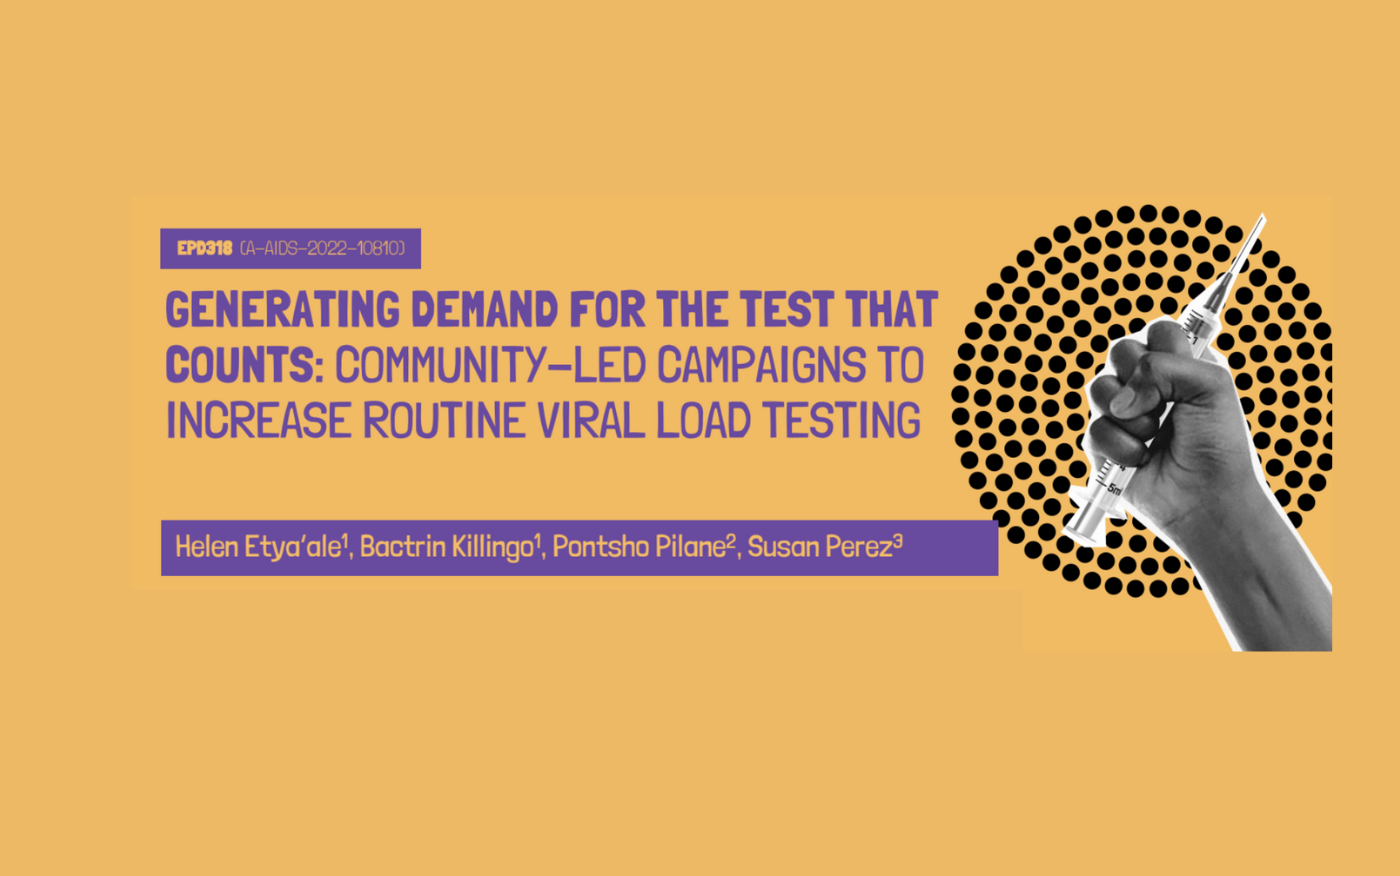 Generating demand for the test that counts: community-led campaigns to increase routine viral load testing